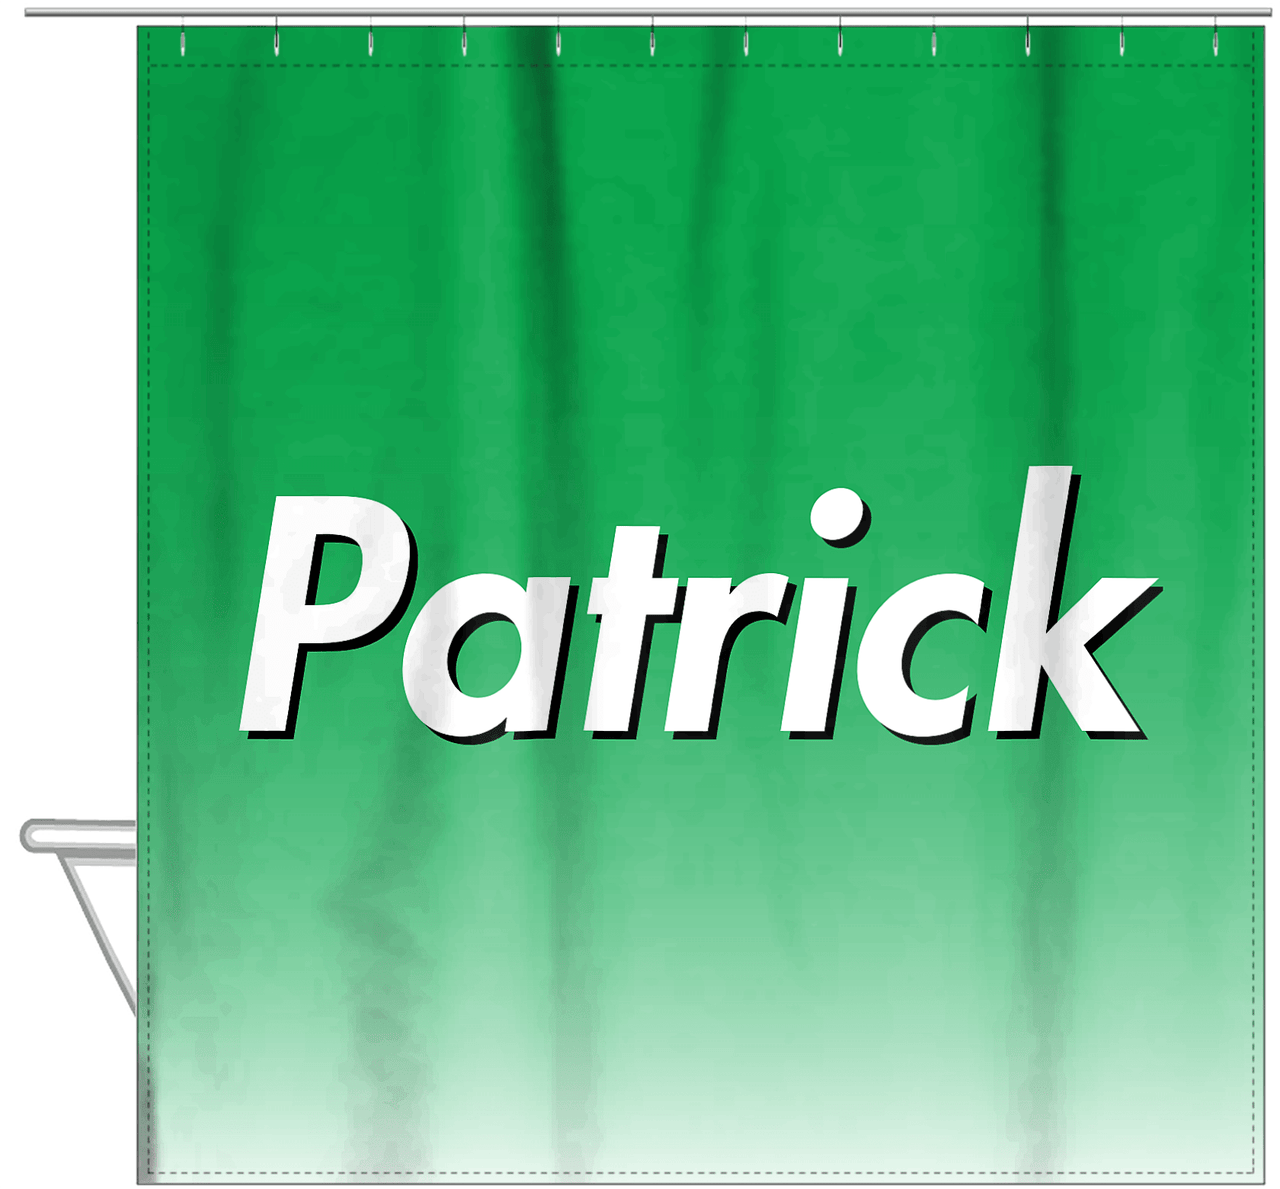 Personalized Ombre Shower Curtain - Green and White - Hanging View